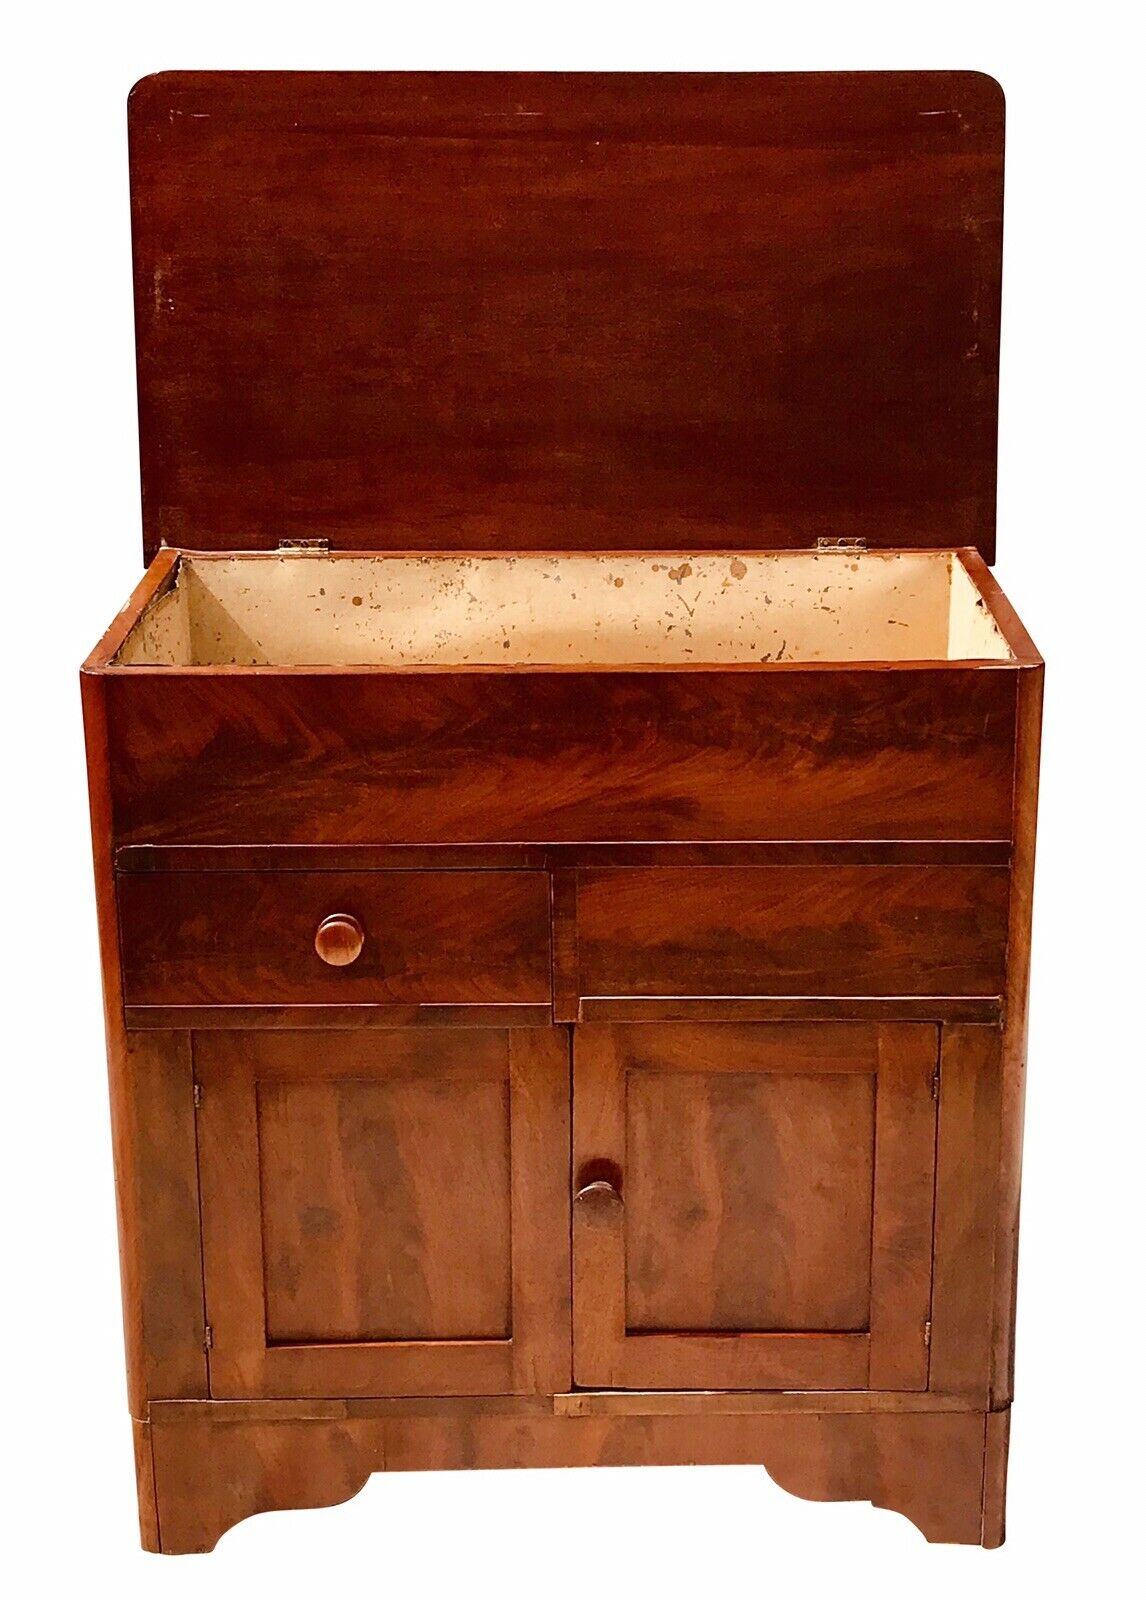 19TH C ANTIQUE AMERICAN EMPIRE MAHOGANY LIFT TOP COMMODE / WASH STAND